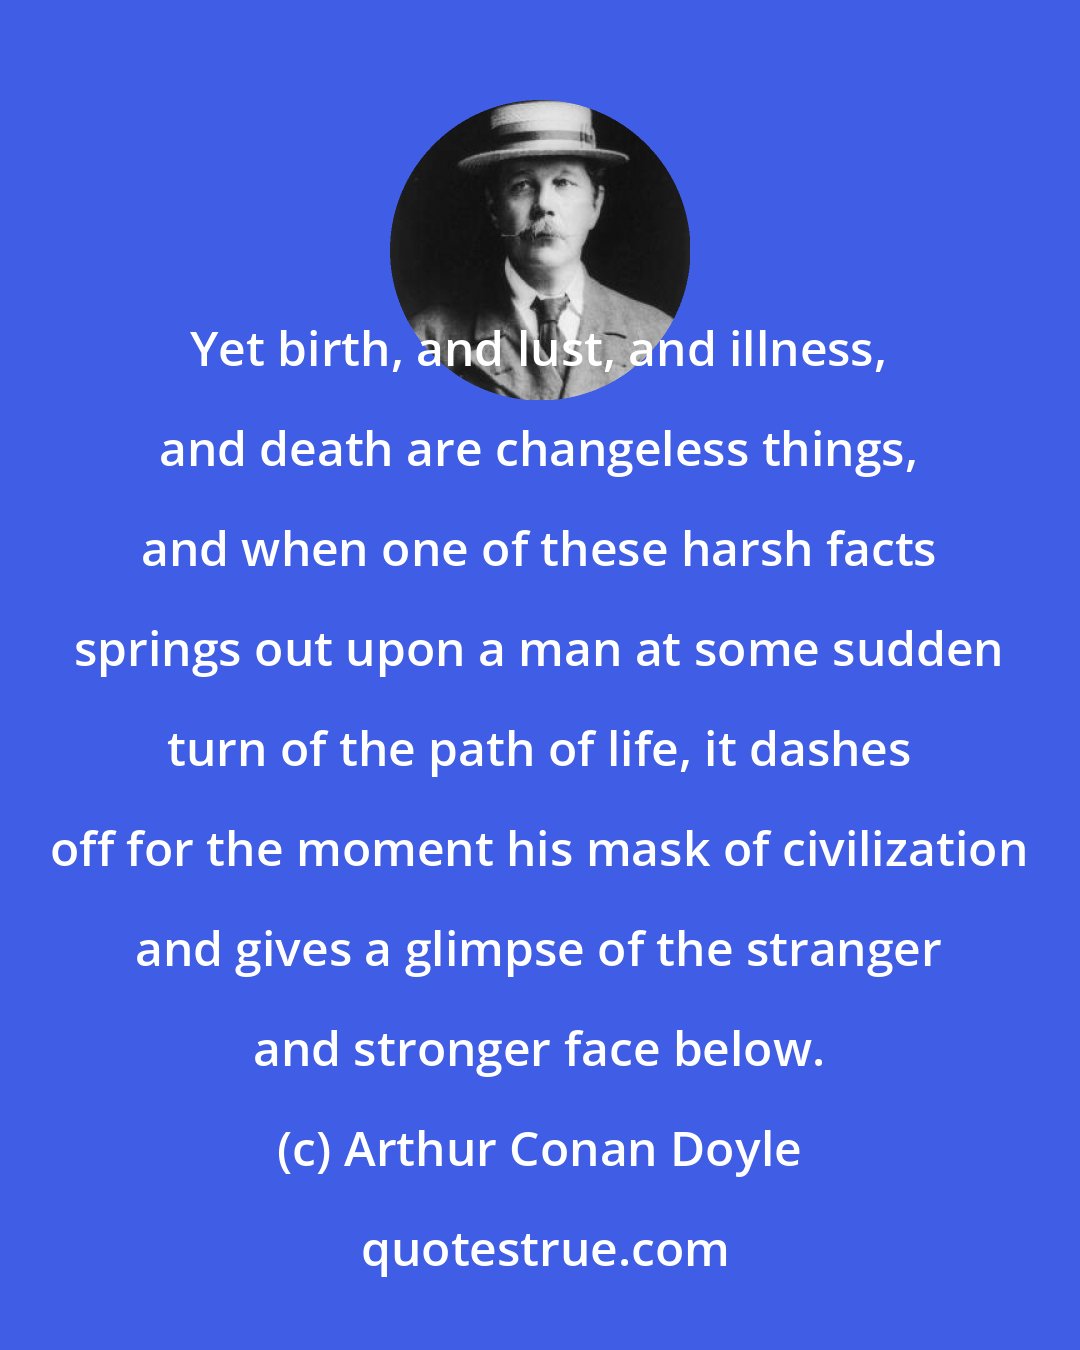 Arthur Conan Doyle: Yet birth, and lust, and illness, and death are changeless things, and when one of these harsh facts springs out upon a man at some sudden turn of the path of life, it dashes off for the moment his mask of civilization and gives a glimpse of the stranger and stronger face below.